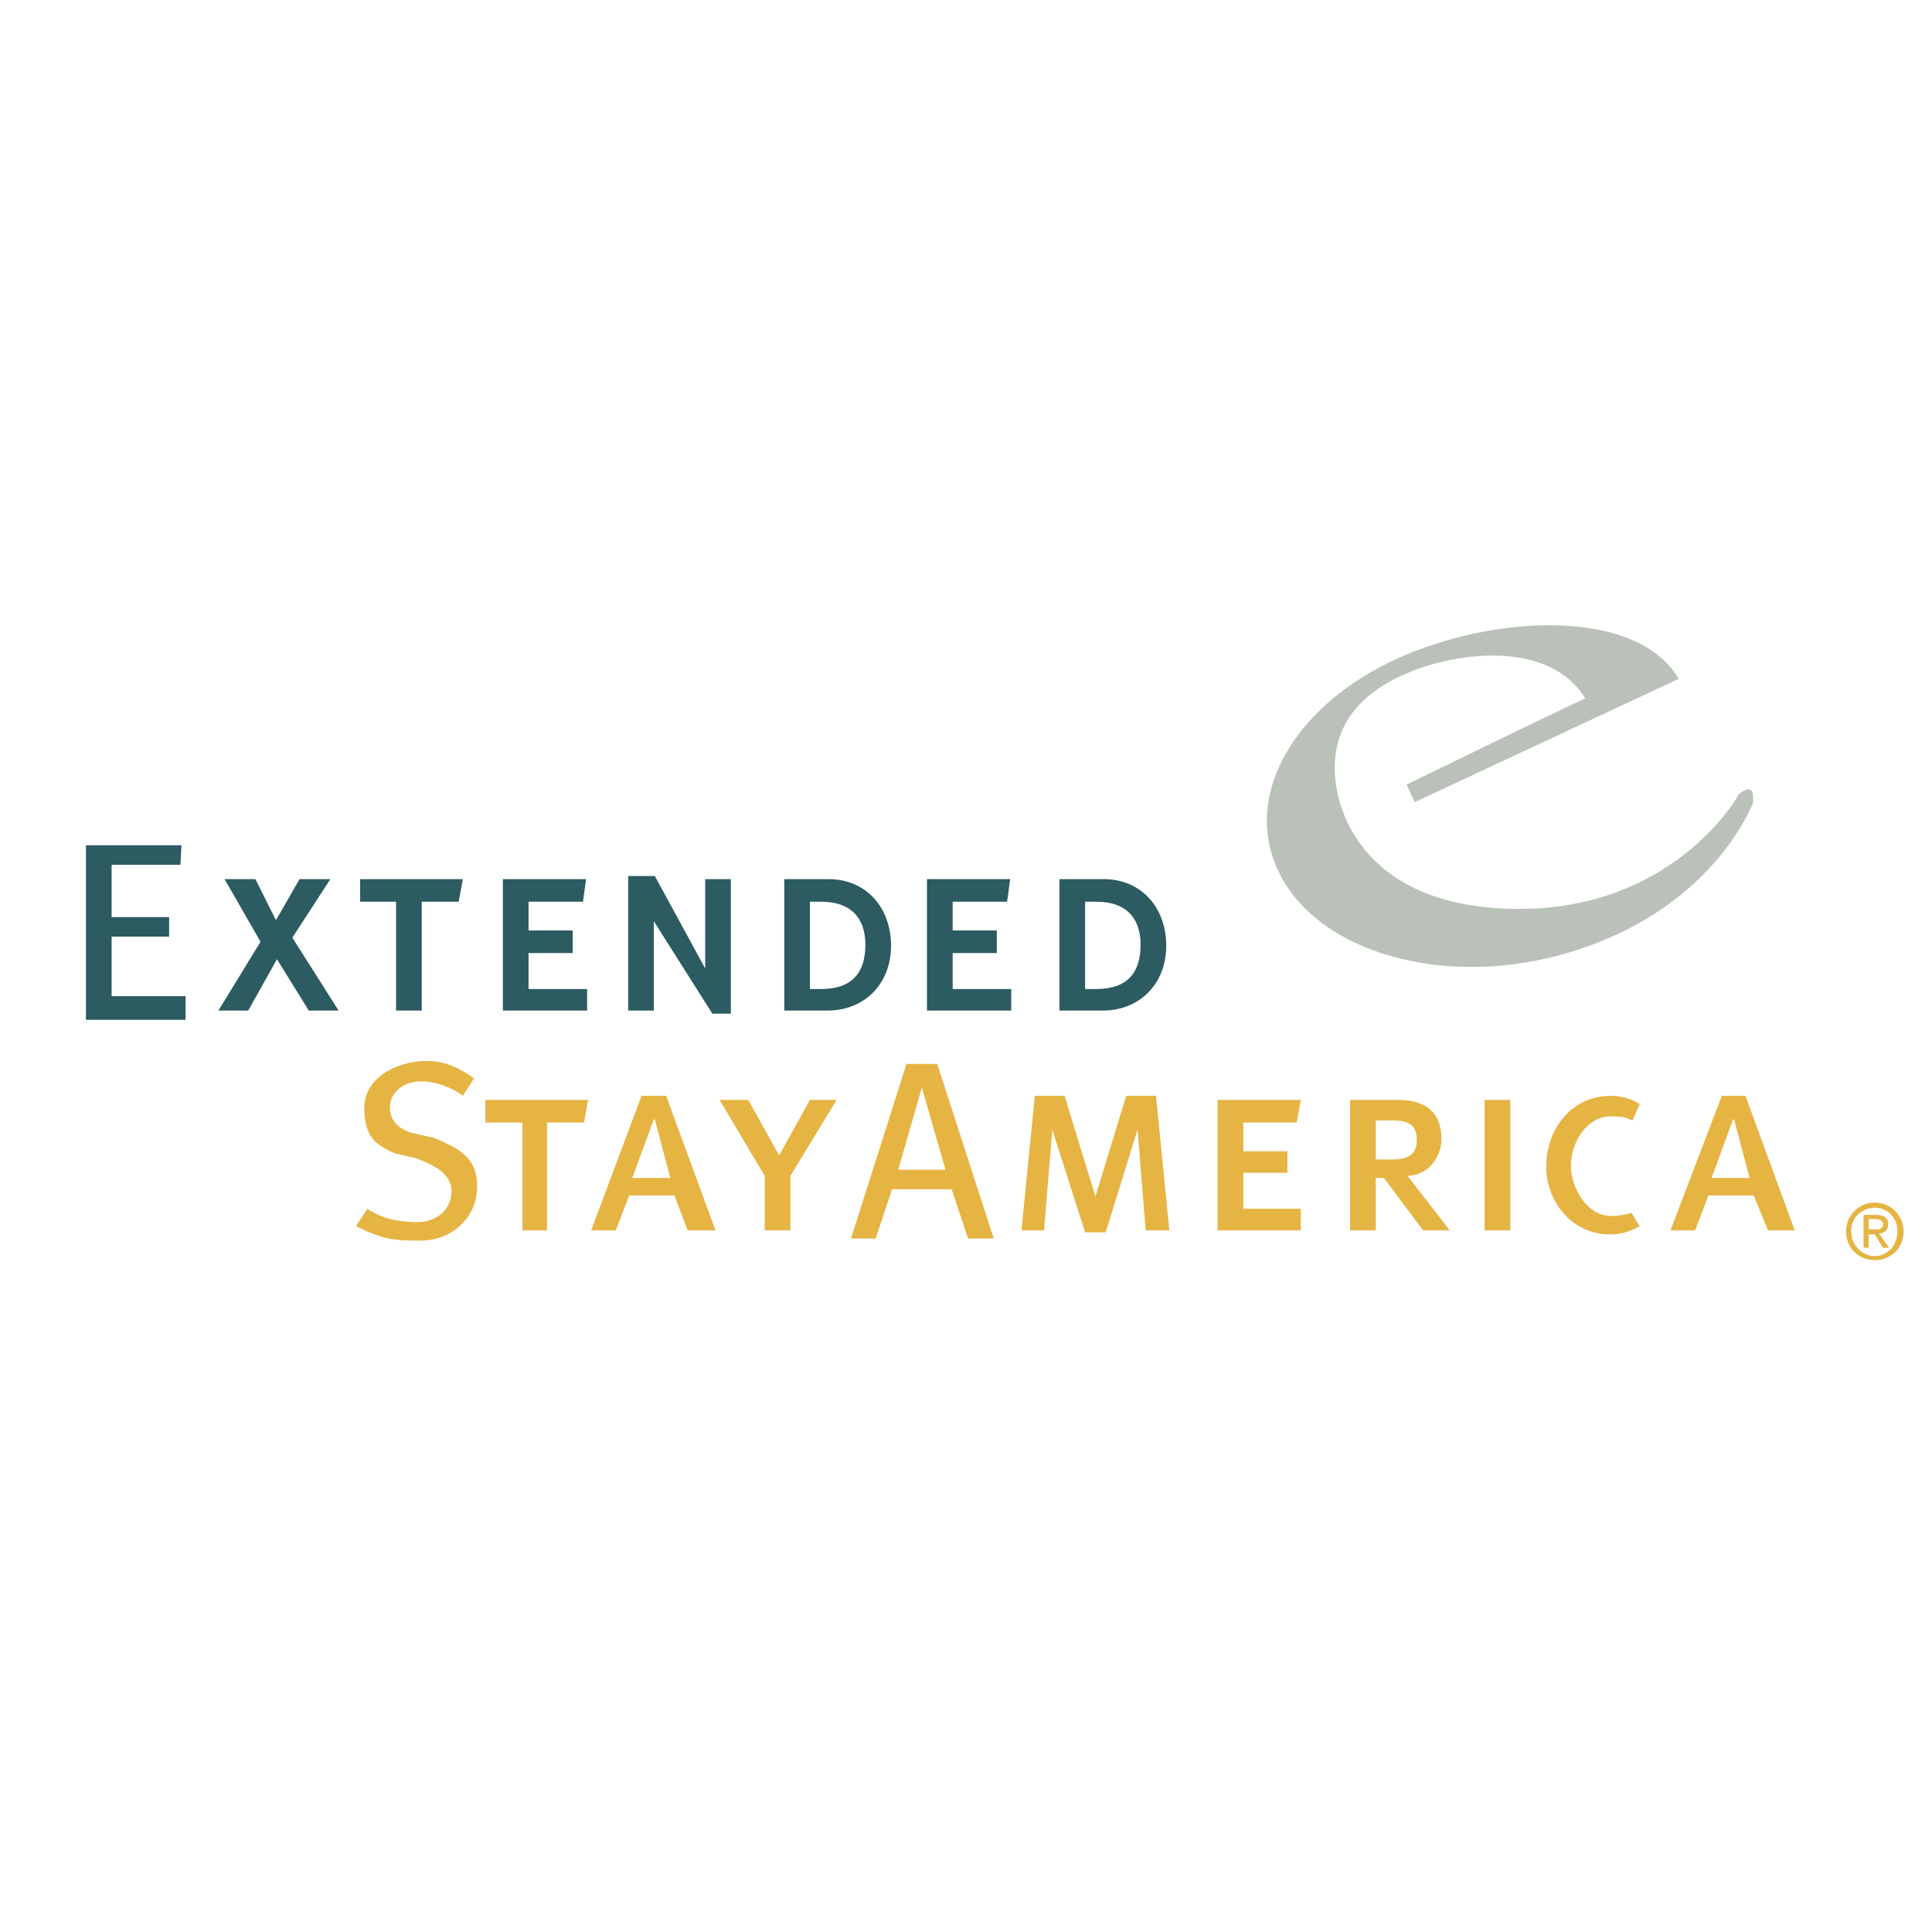 Extended Stay America logo colors